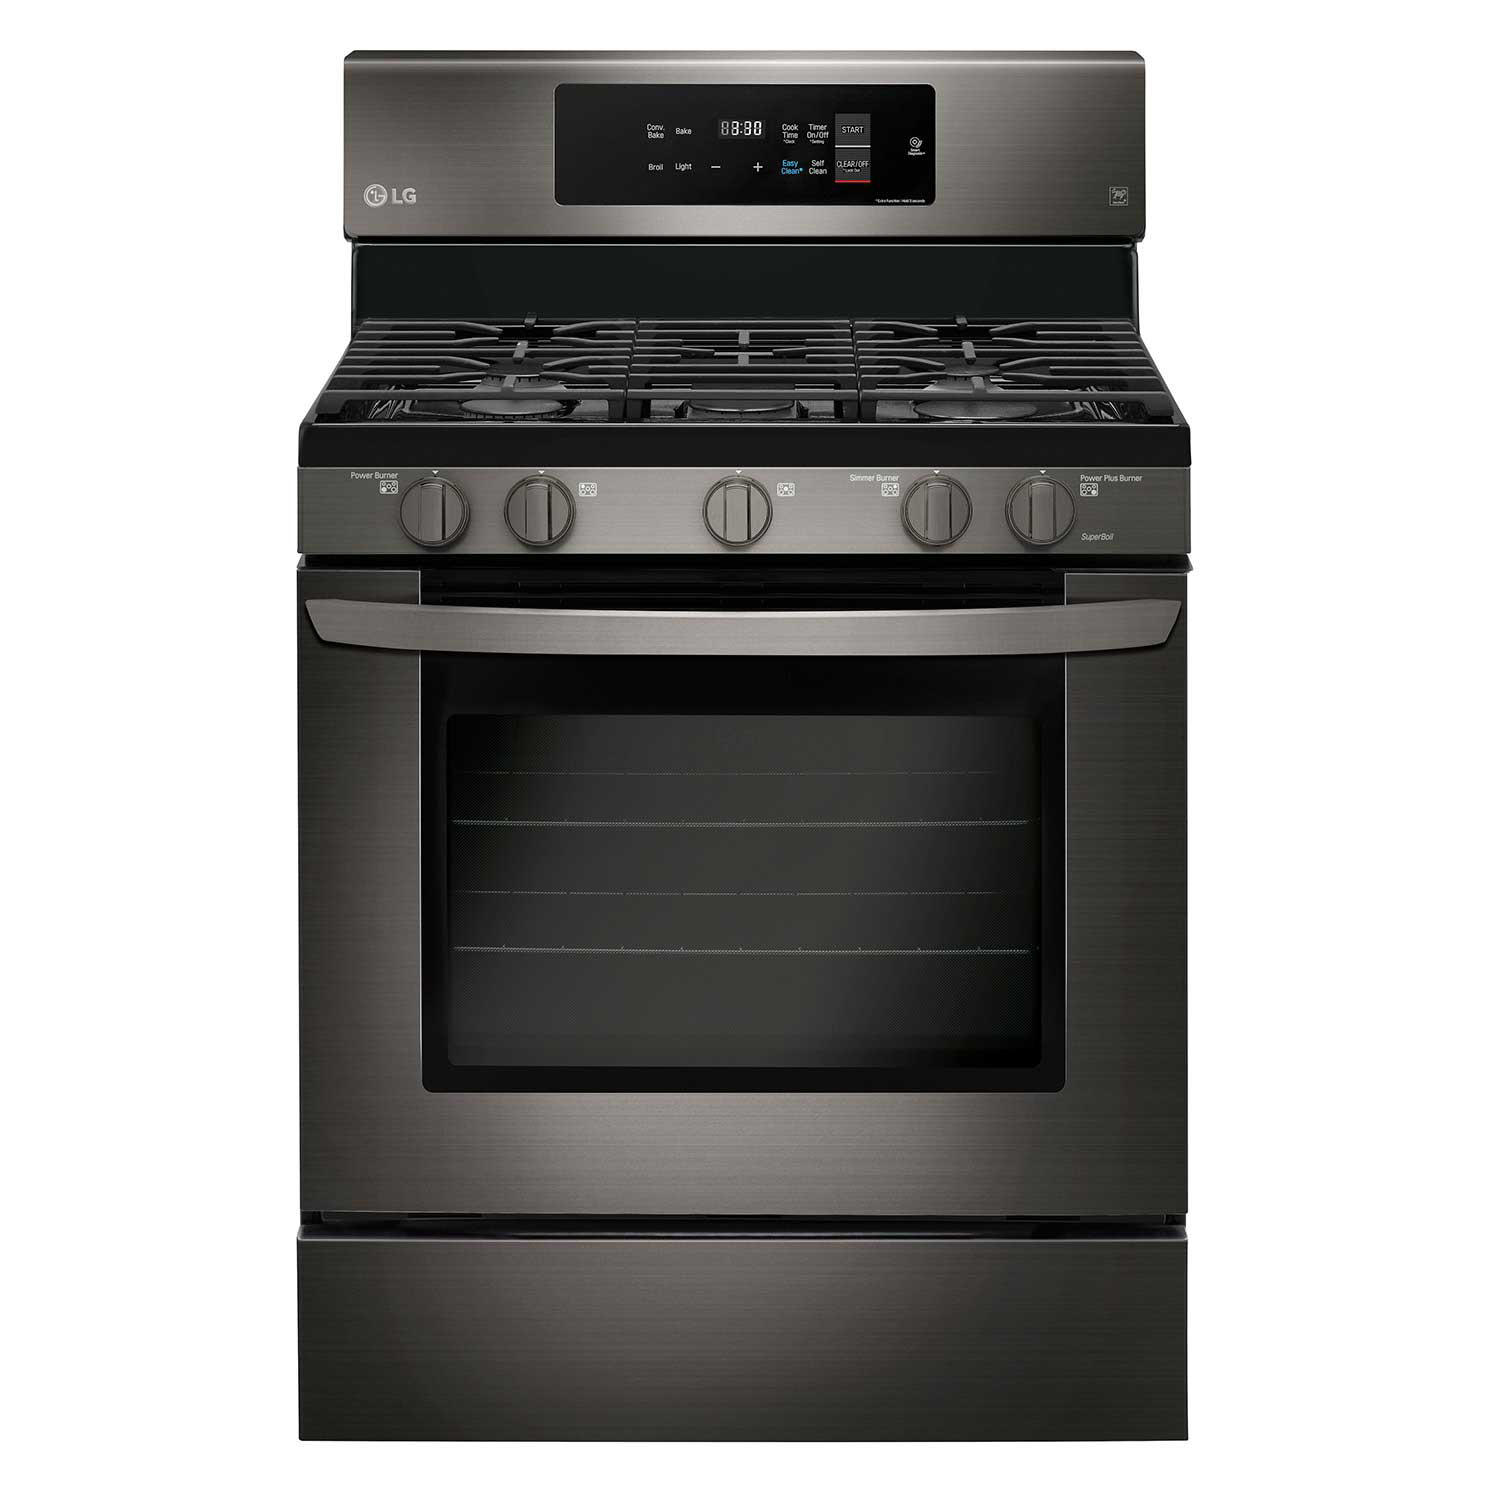 LG LRG3194 5.4 Cu Ft GAS Single Oven Range with Fan Convection and Easy Clean